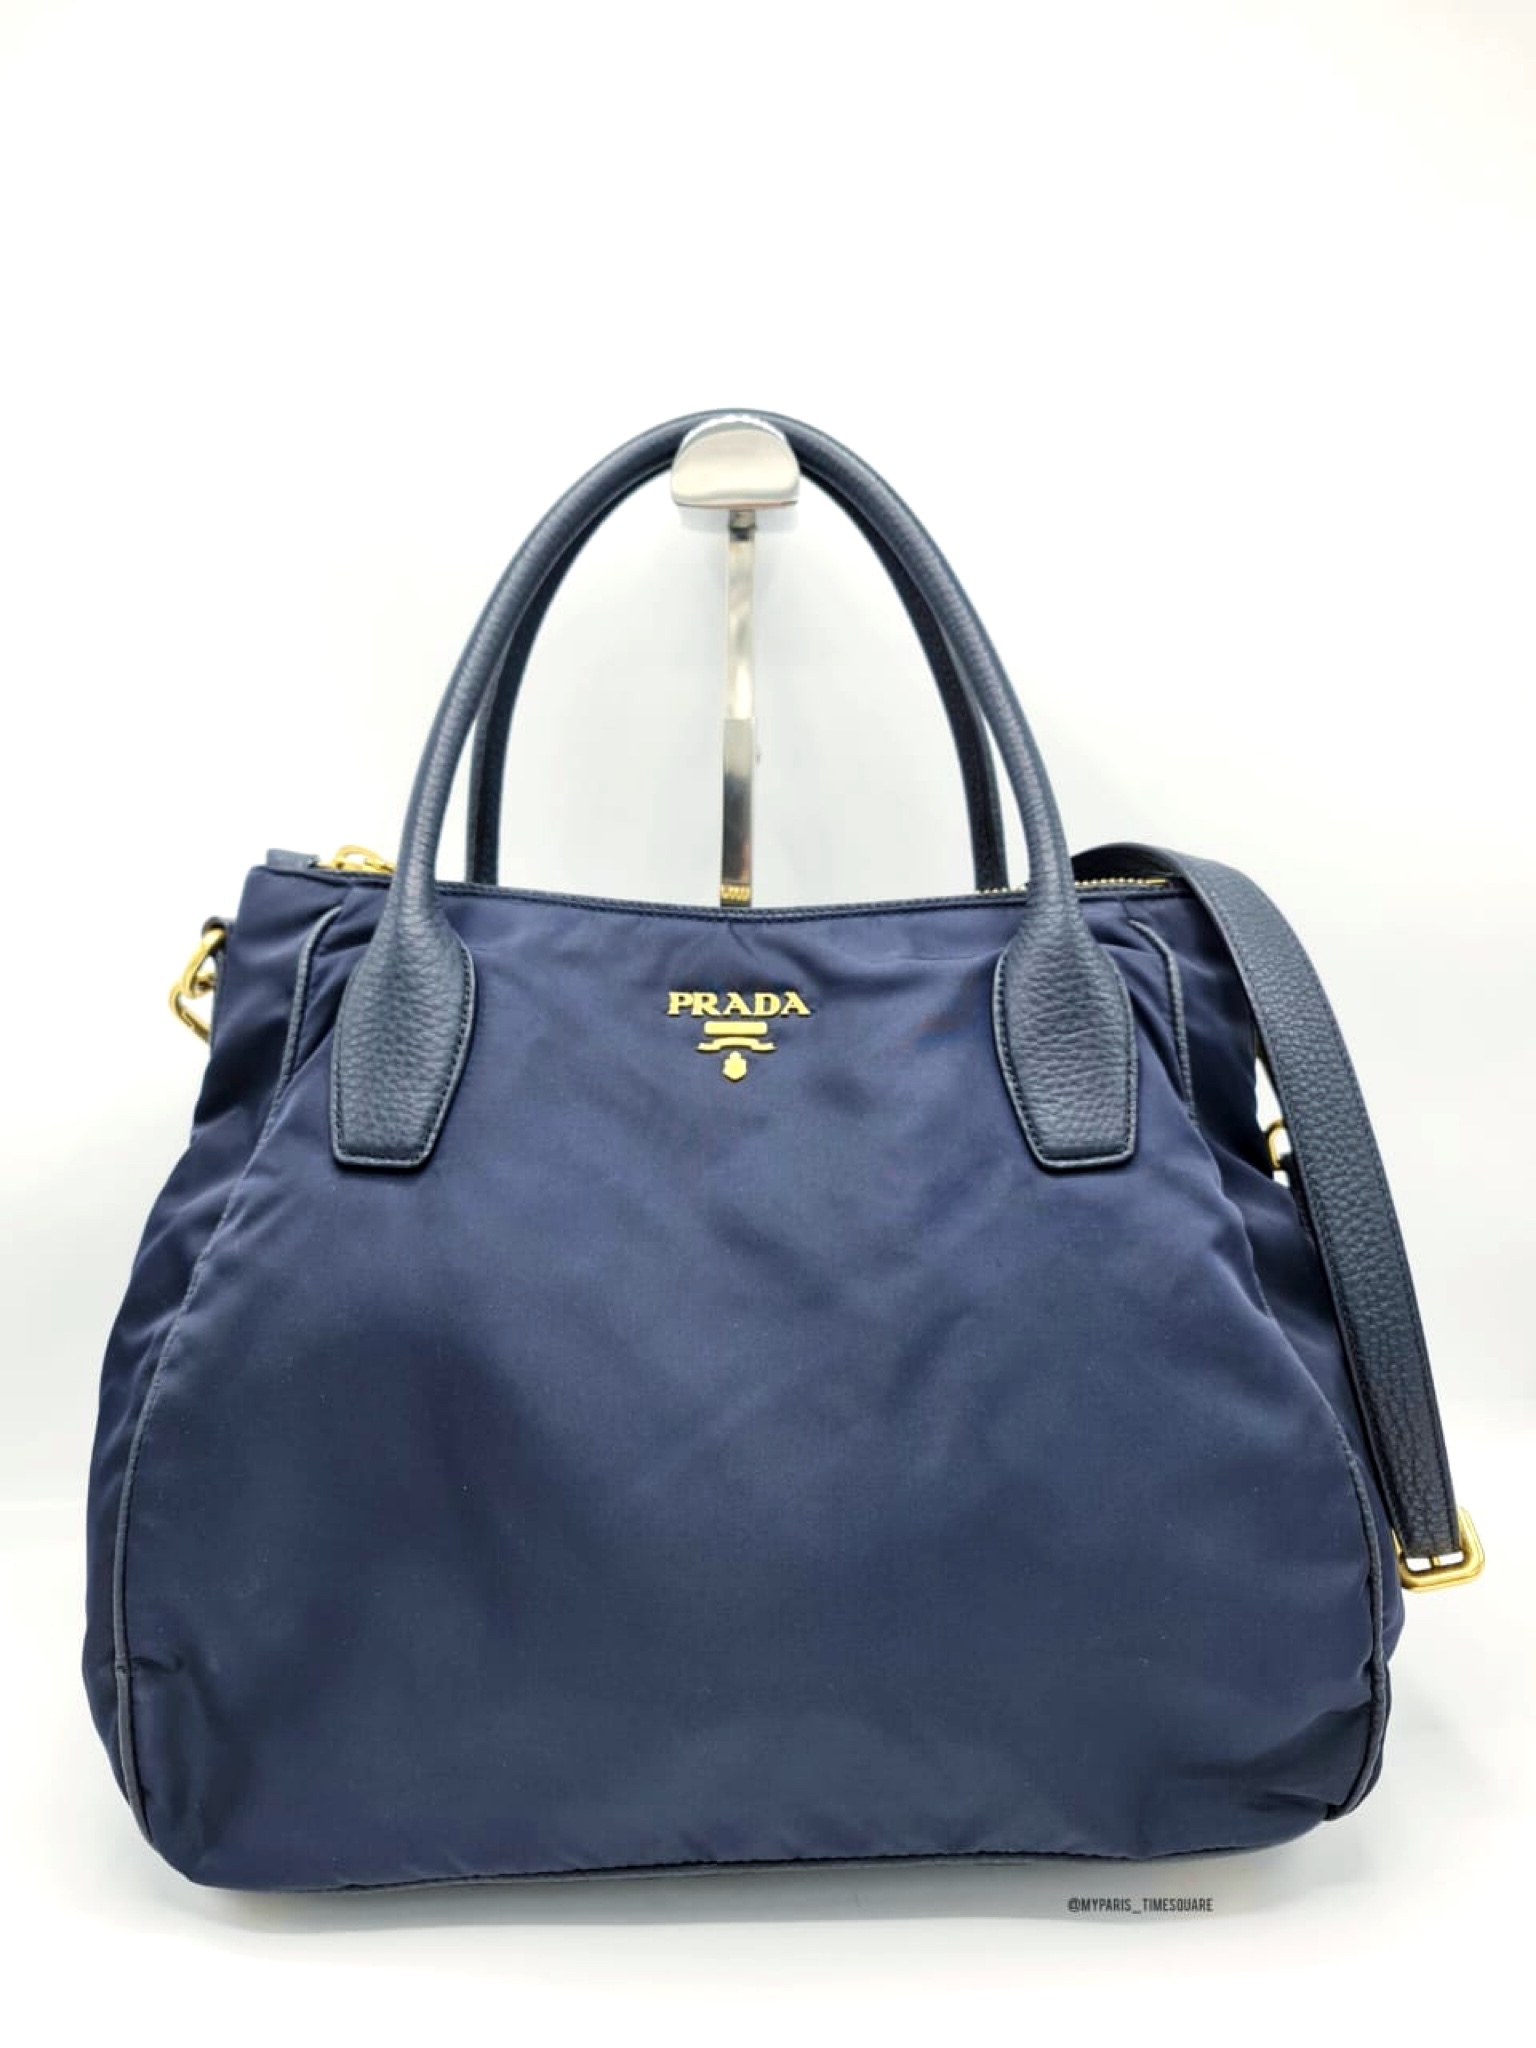 Prada BR4992 Tessuto Soft Calf Leather Convertible Bag in Blue – My Paris  Branded Station-Sell Your Bags And Get Instant Cash